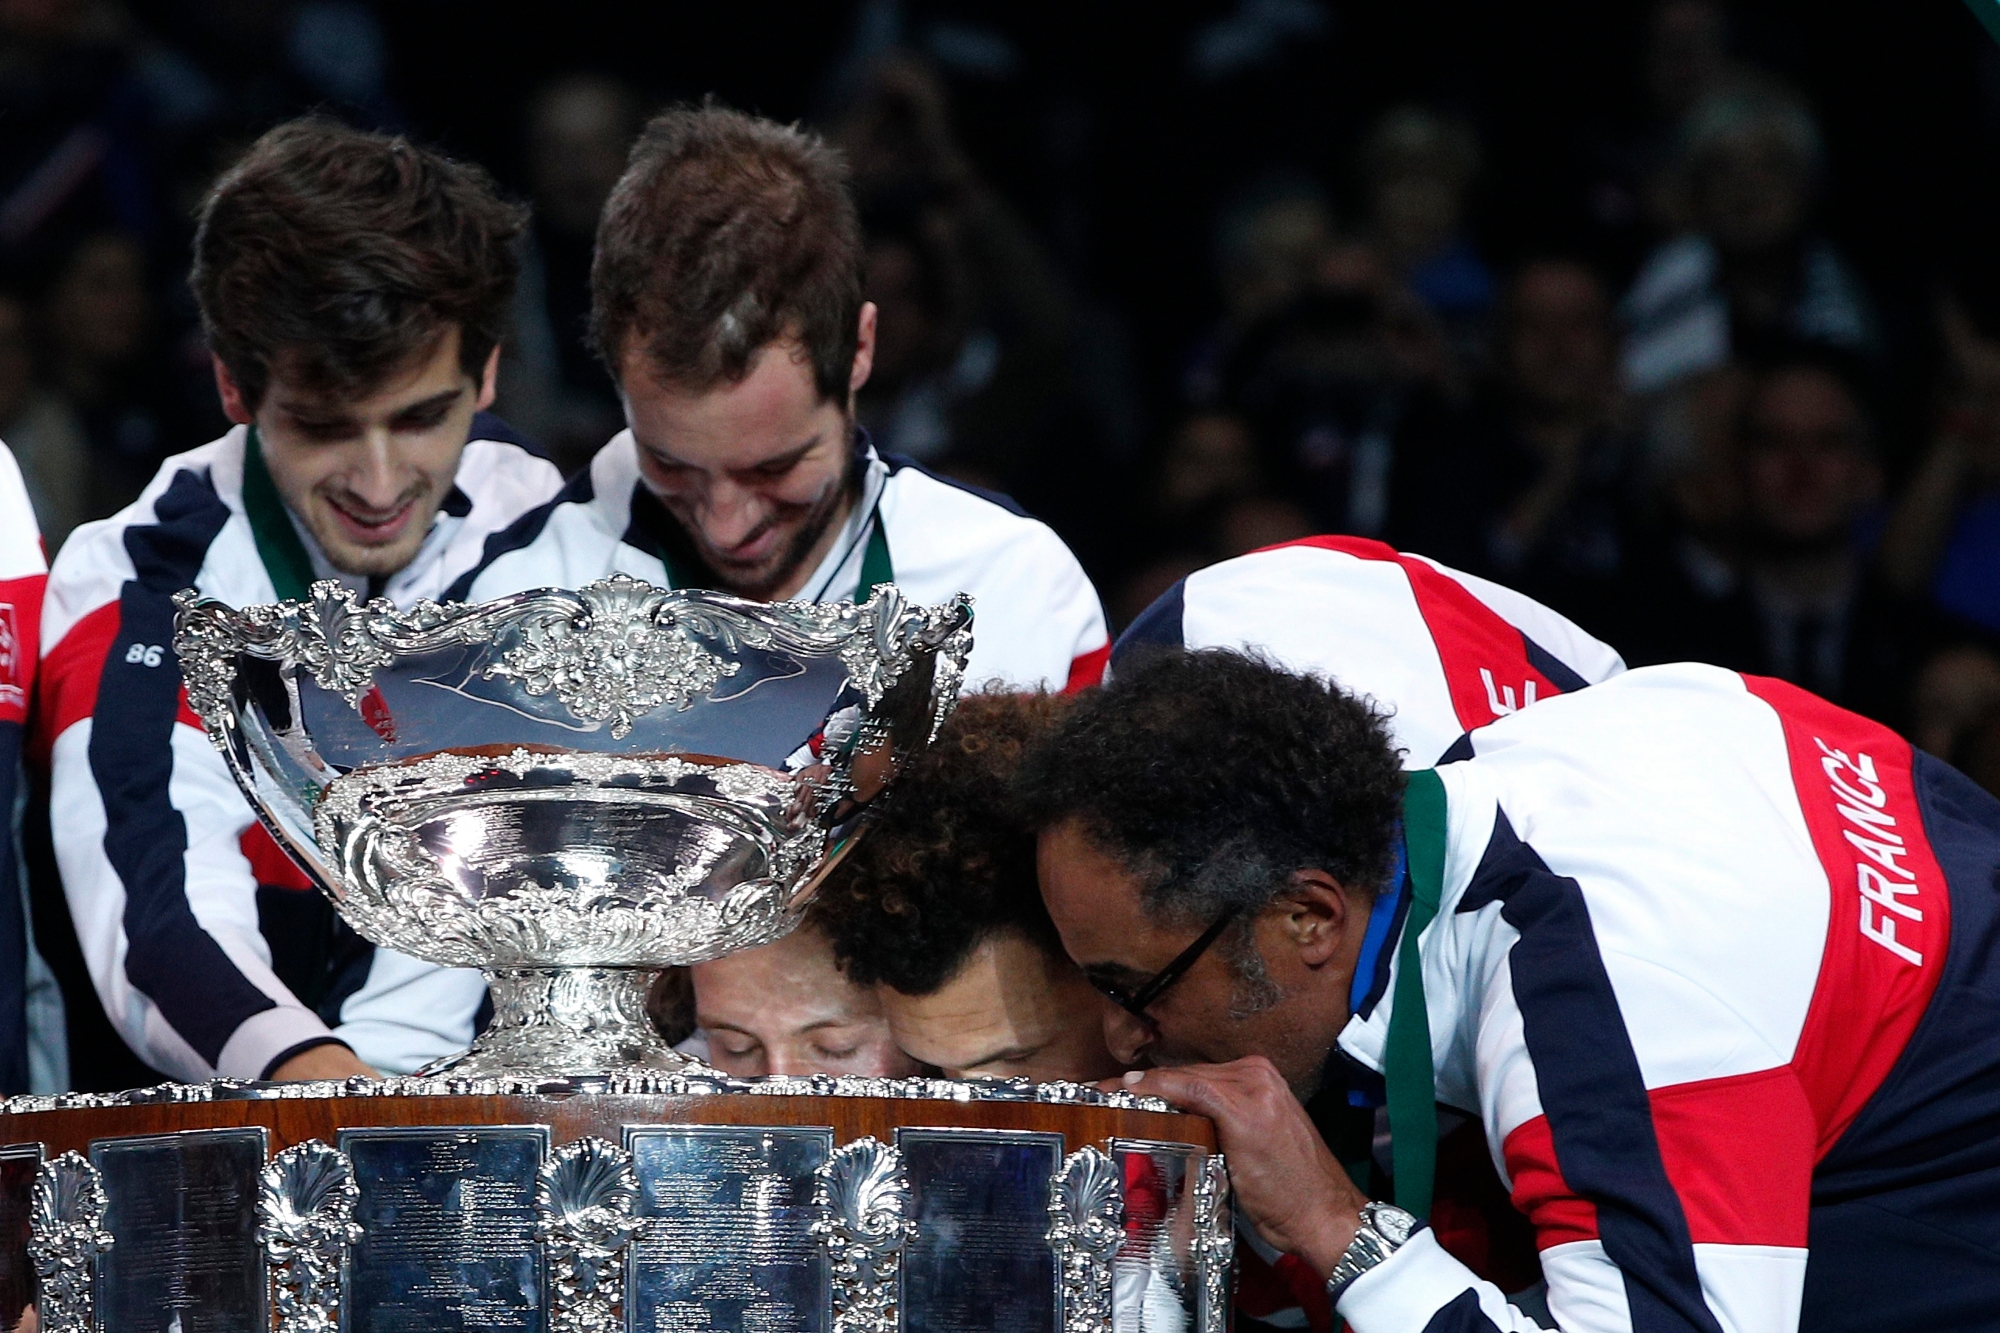 France's, from the right, Yannick Noah, Jo-Wilfired Tsonga, Richard Gasquet, second right, and Pierre-Hugues Herbert kiss and touch the cup after France won the Davis Cup at the Pierre Mauroy stadium in Lille, northern France, Sunday, Nov.26, 2017. France won the Davis Cup for the first time in 16 years after beating Belgium 3-2. (AP Photo/Christophe Ena) France Tennis Davis Cup Final